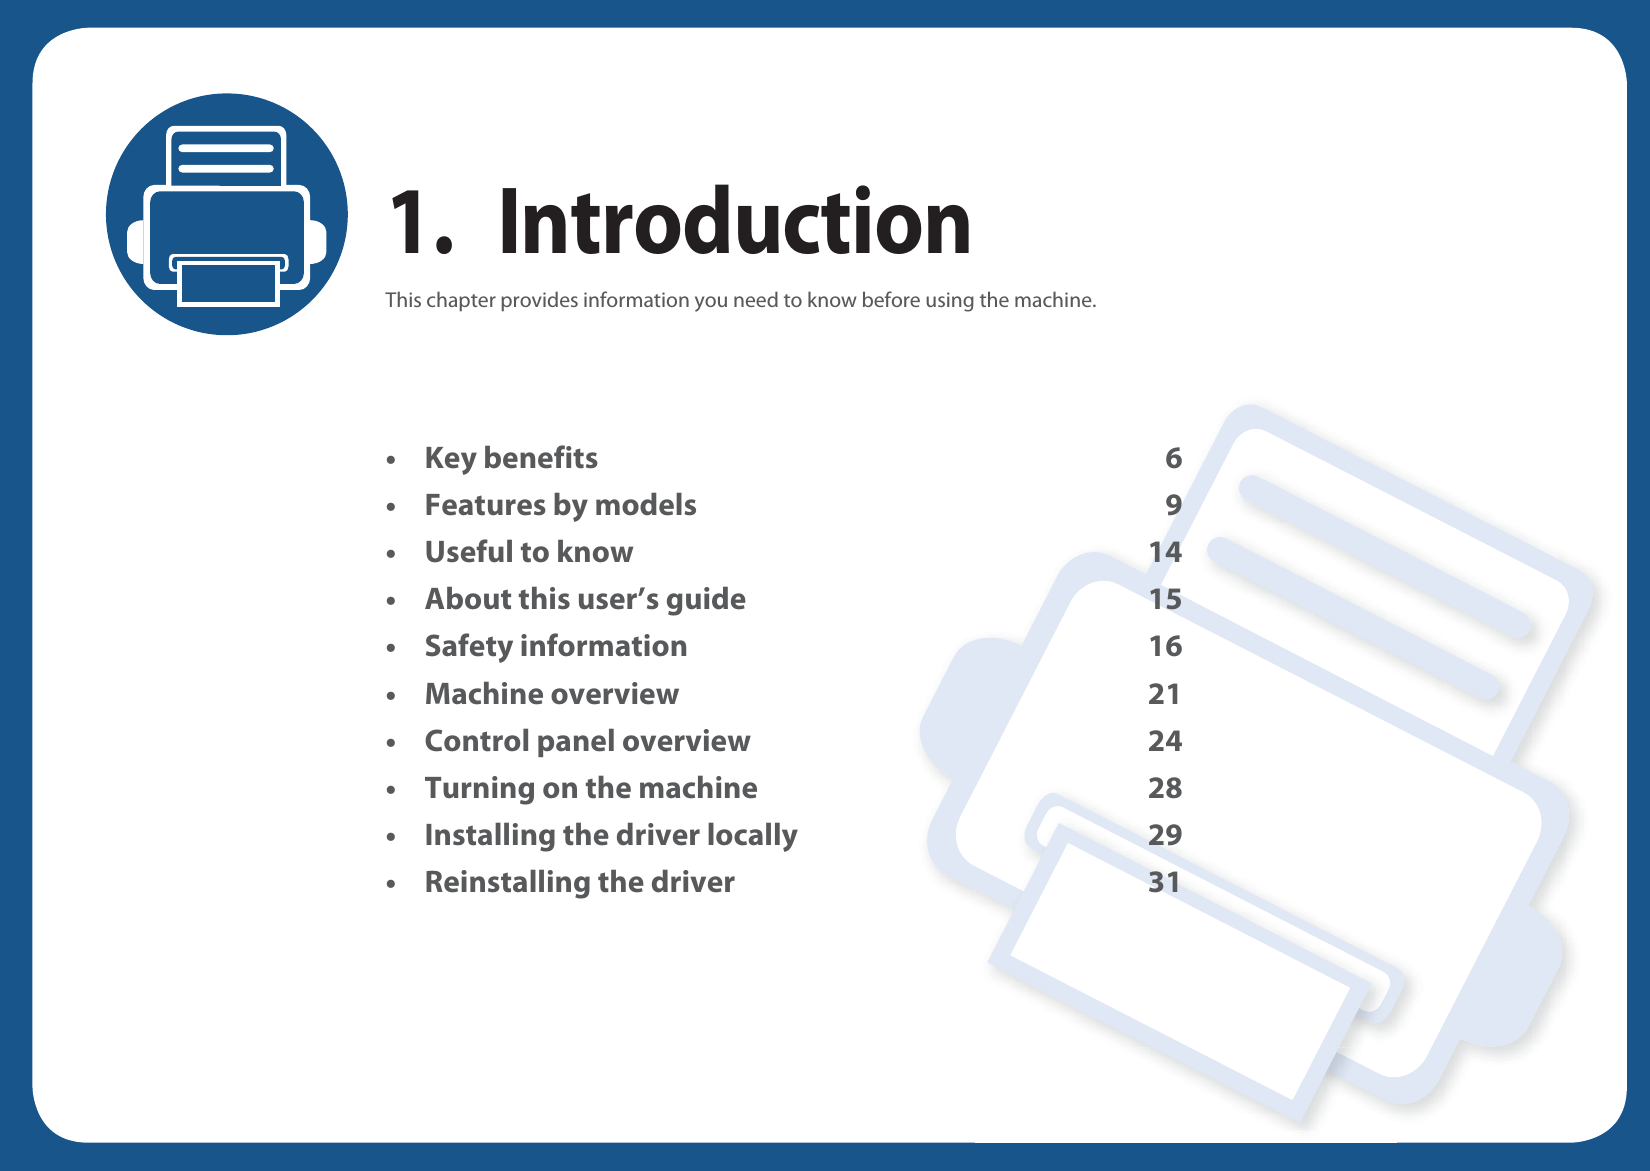 1. IntroductionThis chapter provides information you need to know before using the machine.• Key benefits 6• Features by models 9• Useful to know 14• About this user’s guide 15• Safety information 16• Machine overview 21• Control panel overview 24• Turning on the machine 28• Installing the driver locally 29• Reinstalling the driver 31